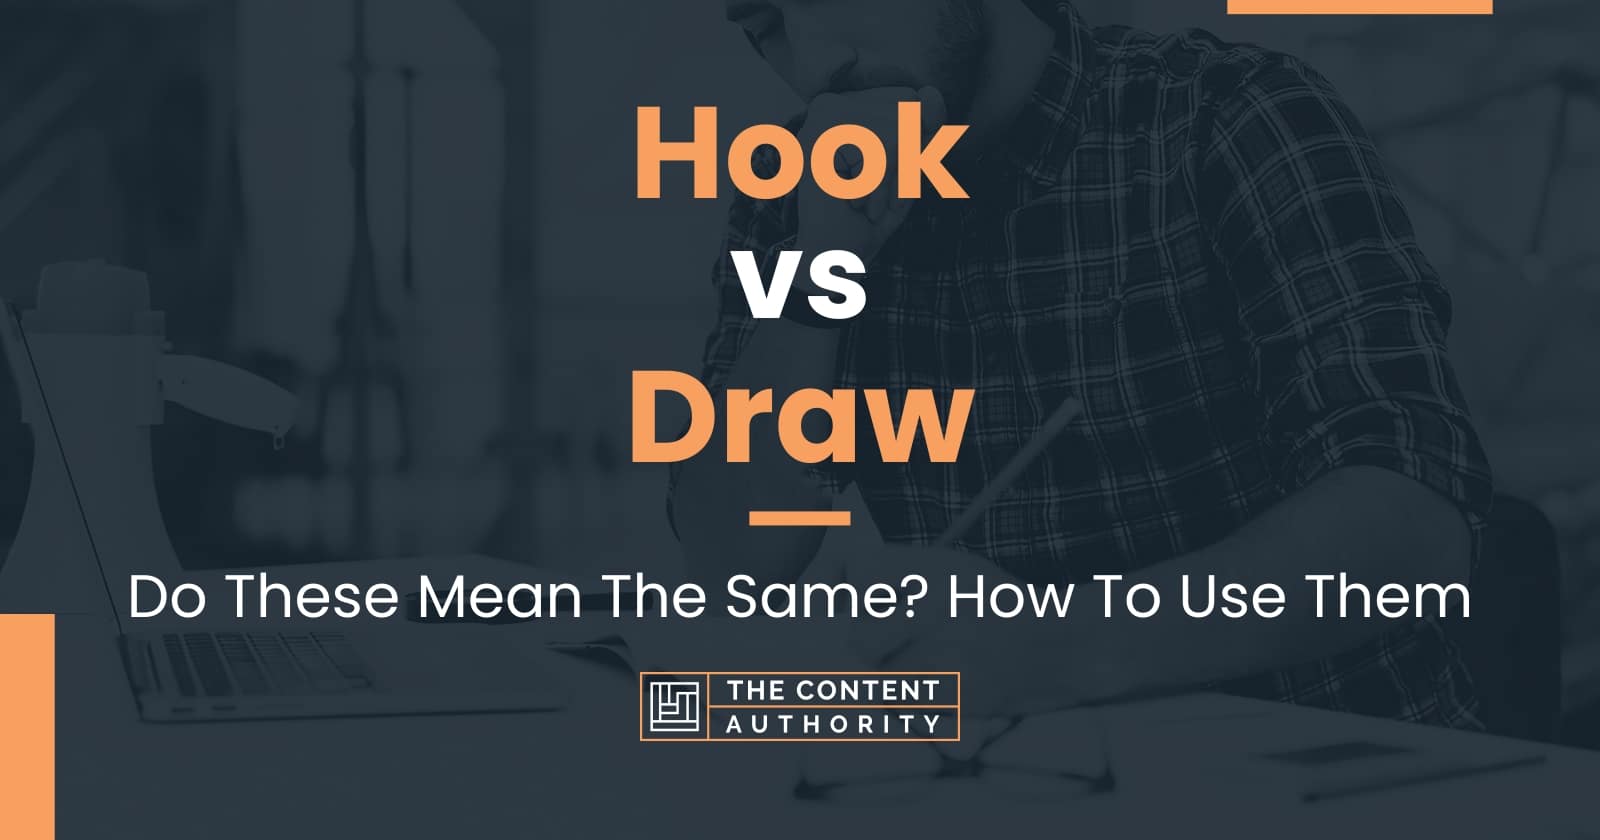 Hook vs Draw Do These Mean The Same? How To Use Them